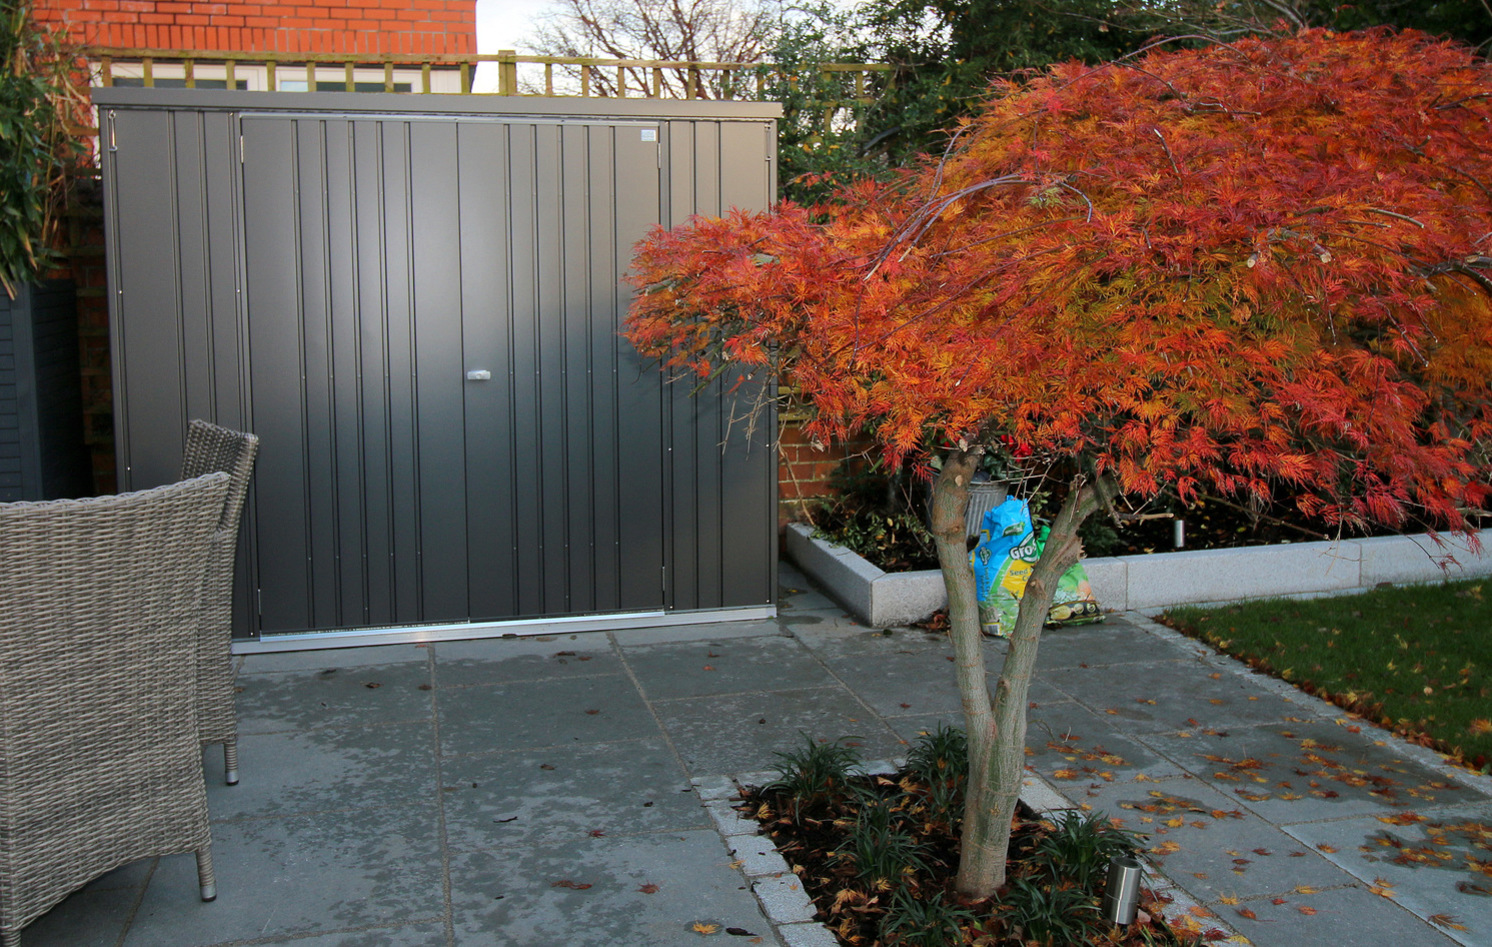 The superb quality and style of the Biohort Equipment Locker 230 in metallic dark grey  with optional accessories including aluminium floor frame, aluminium floor panels | supplied + installed in Rathgar, Dublin 6 by Owen Chubb Landscapers. Tel 087-2306 128.